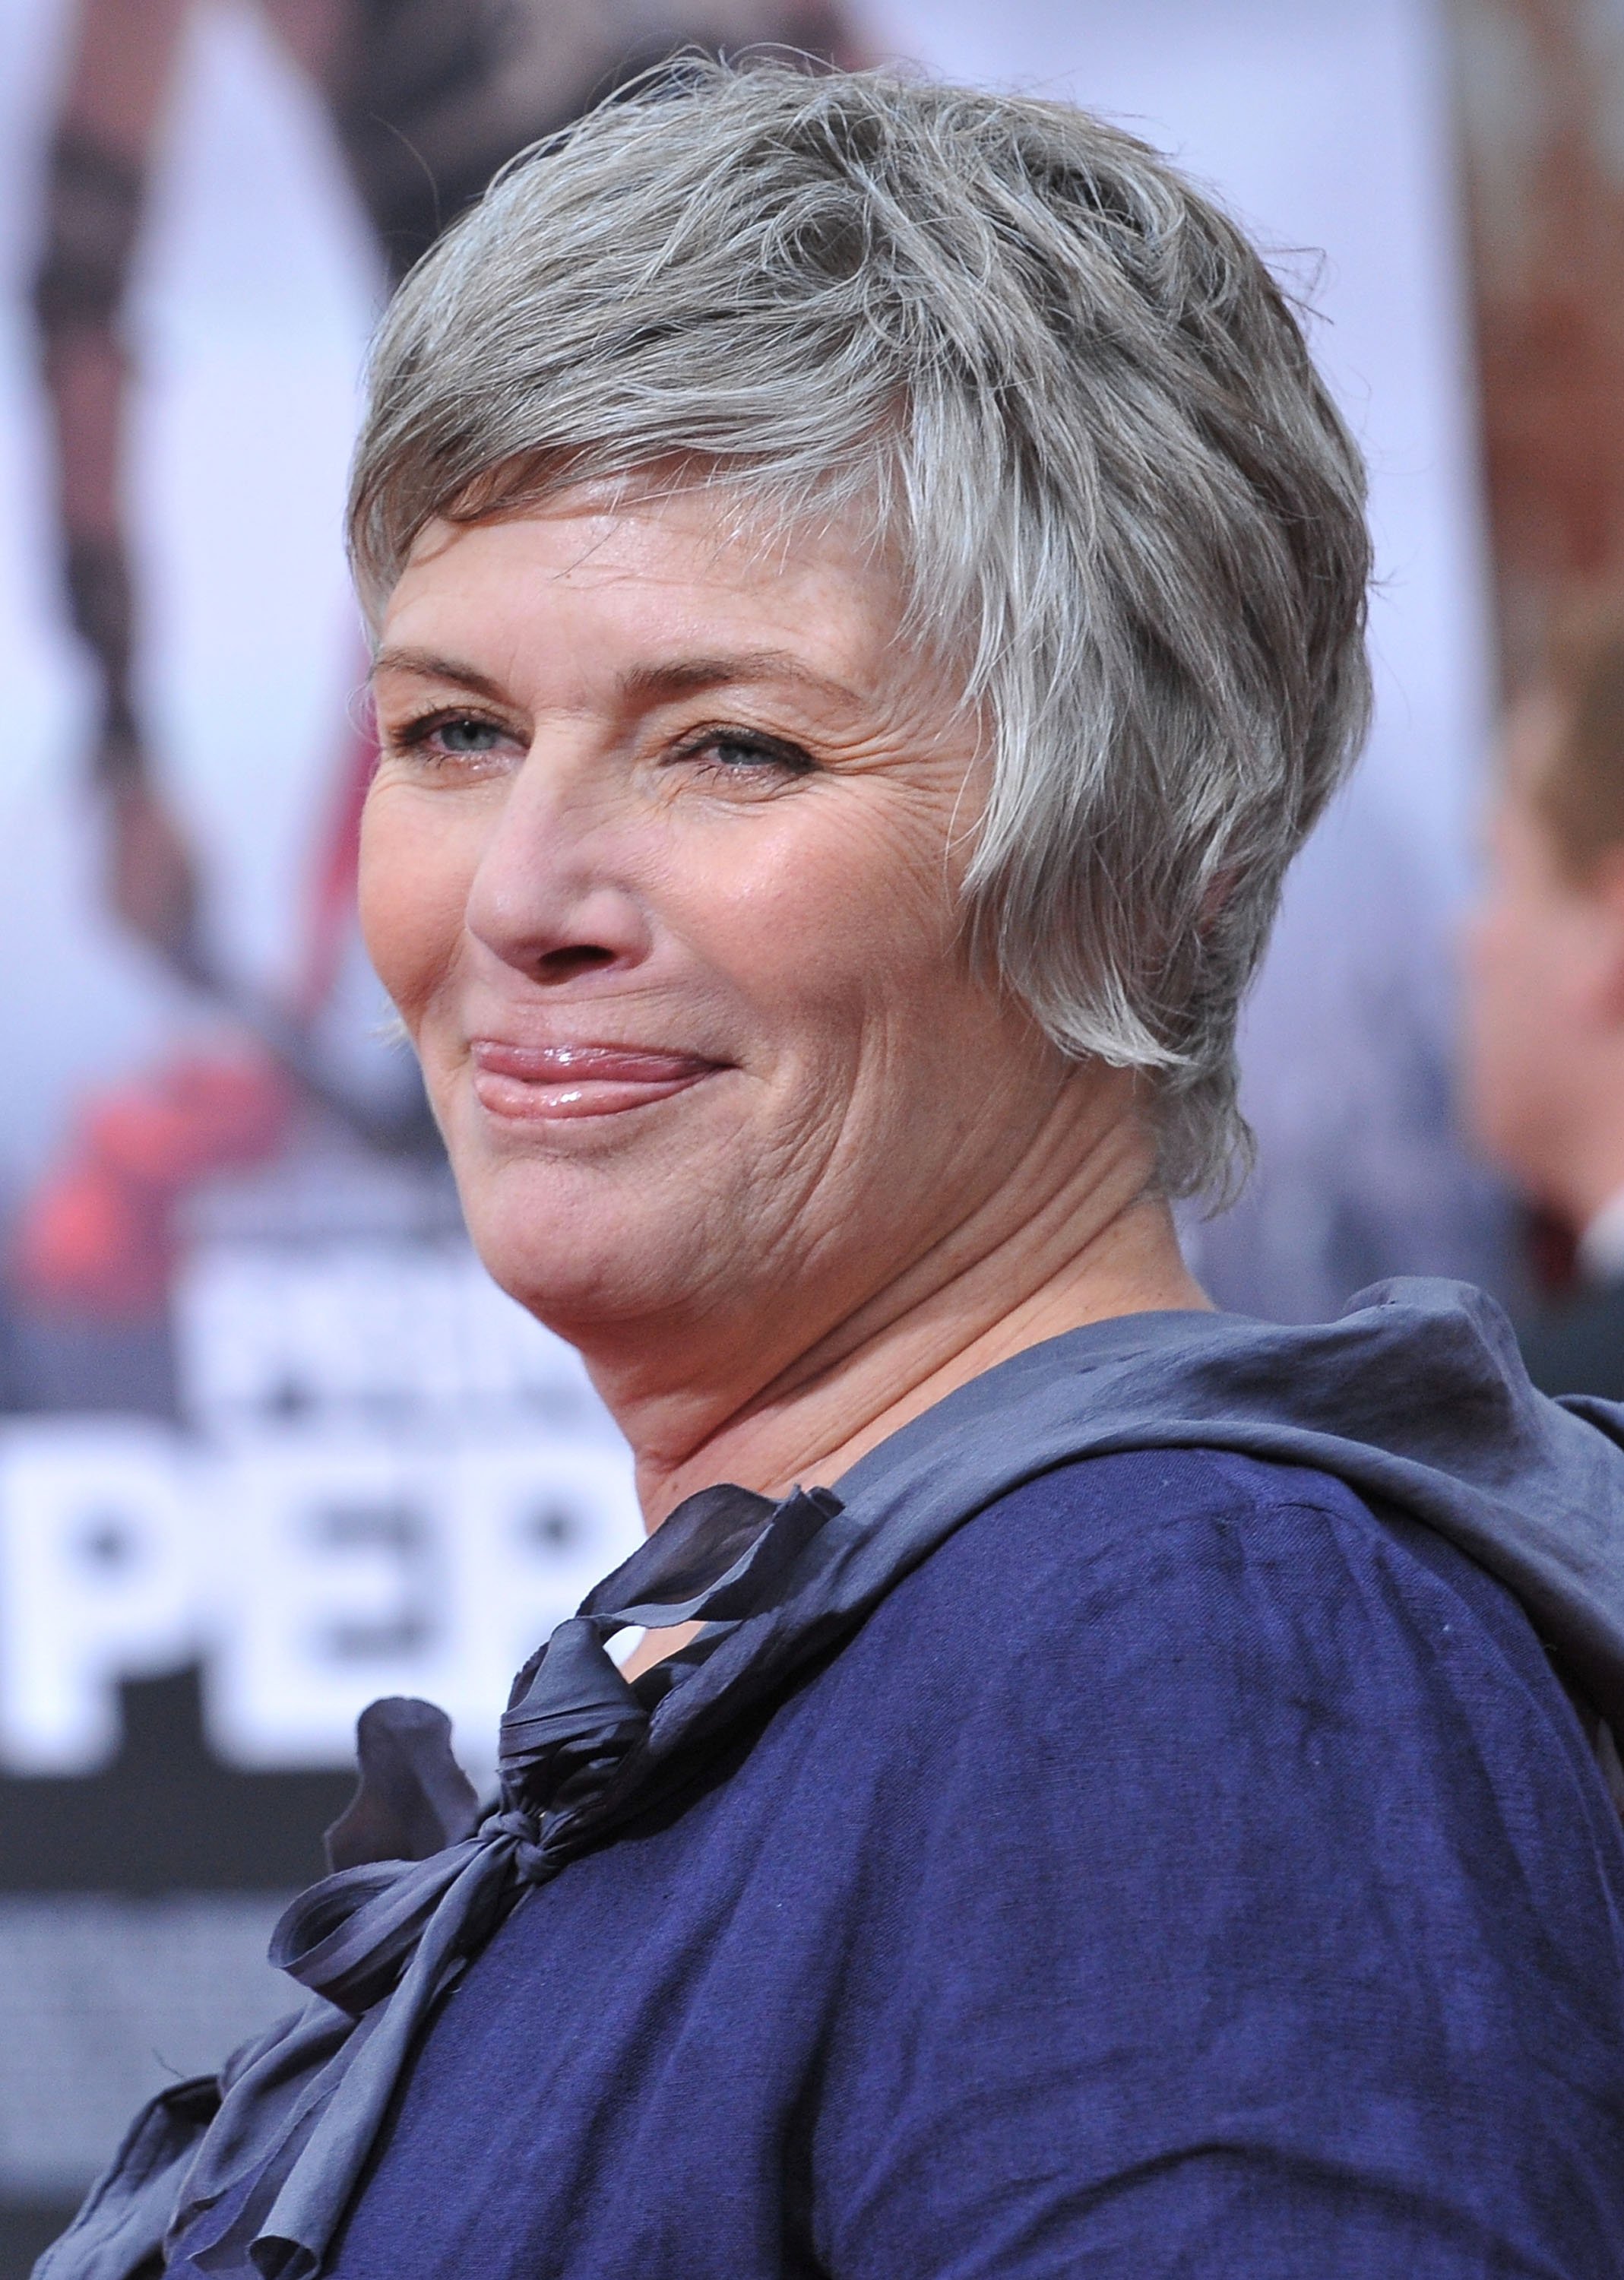 Kelly McGillis arrives at the Los Angeles premiere of "Prince Of Persia: The Sands Of Time" at Grauman's Chinese Theater on May 17, 2010 in Hollywood, California | Source: Getty Images